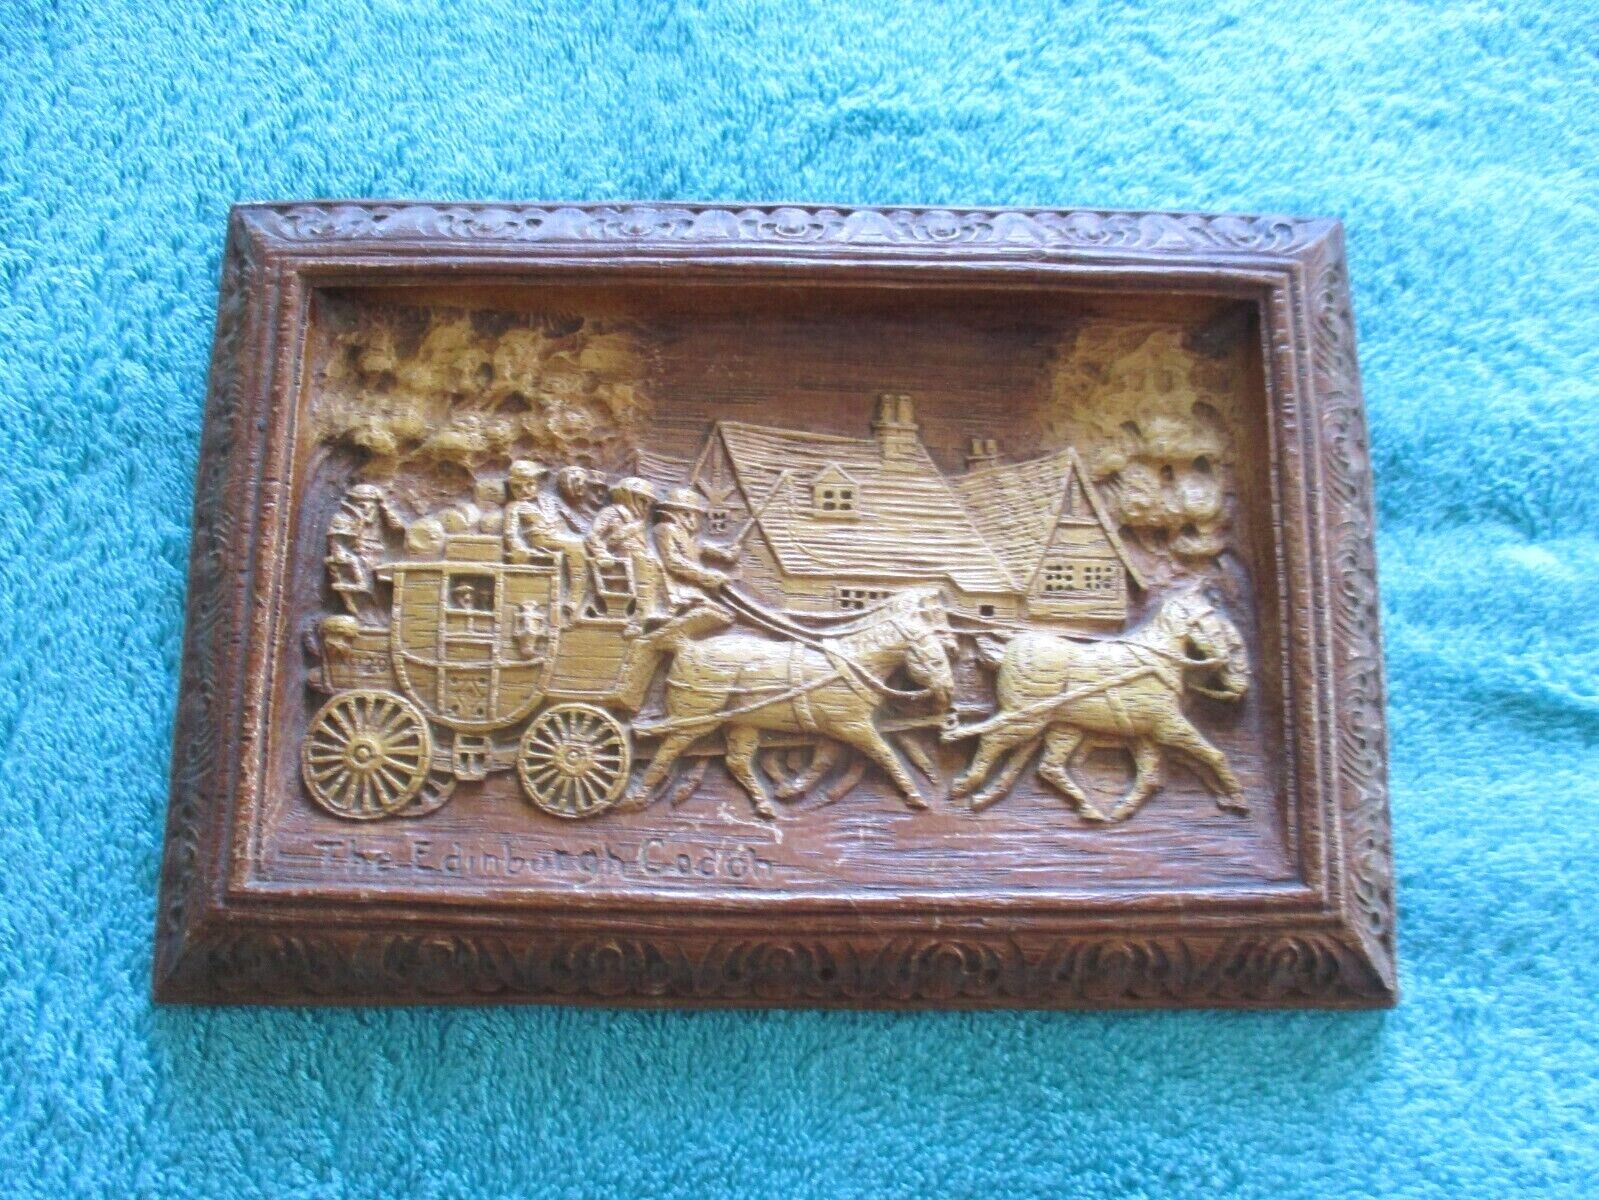 THE EDINBURGH COACH WALL HANGING DECORATIVE COLLECTIBLE 9.5 x 6.5 INCHES